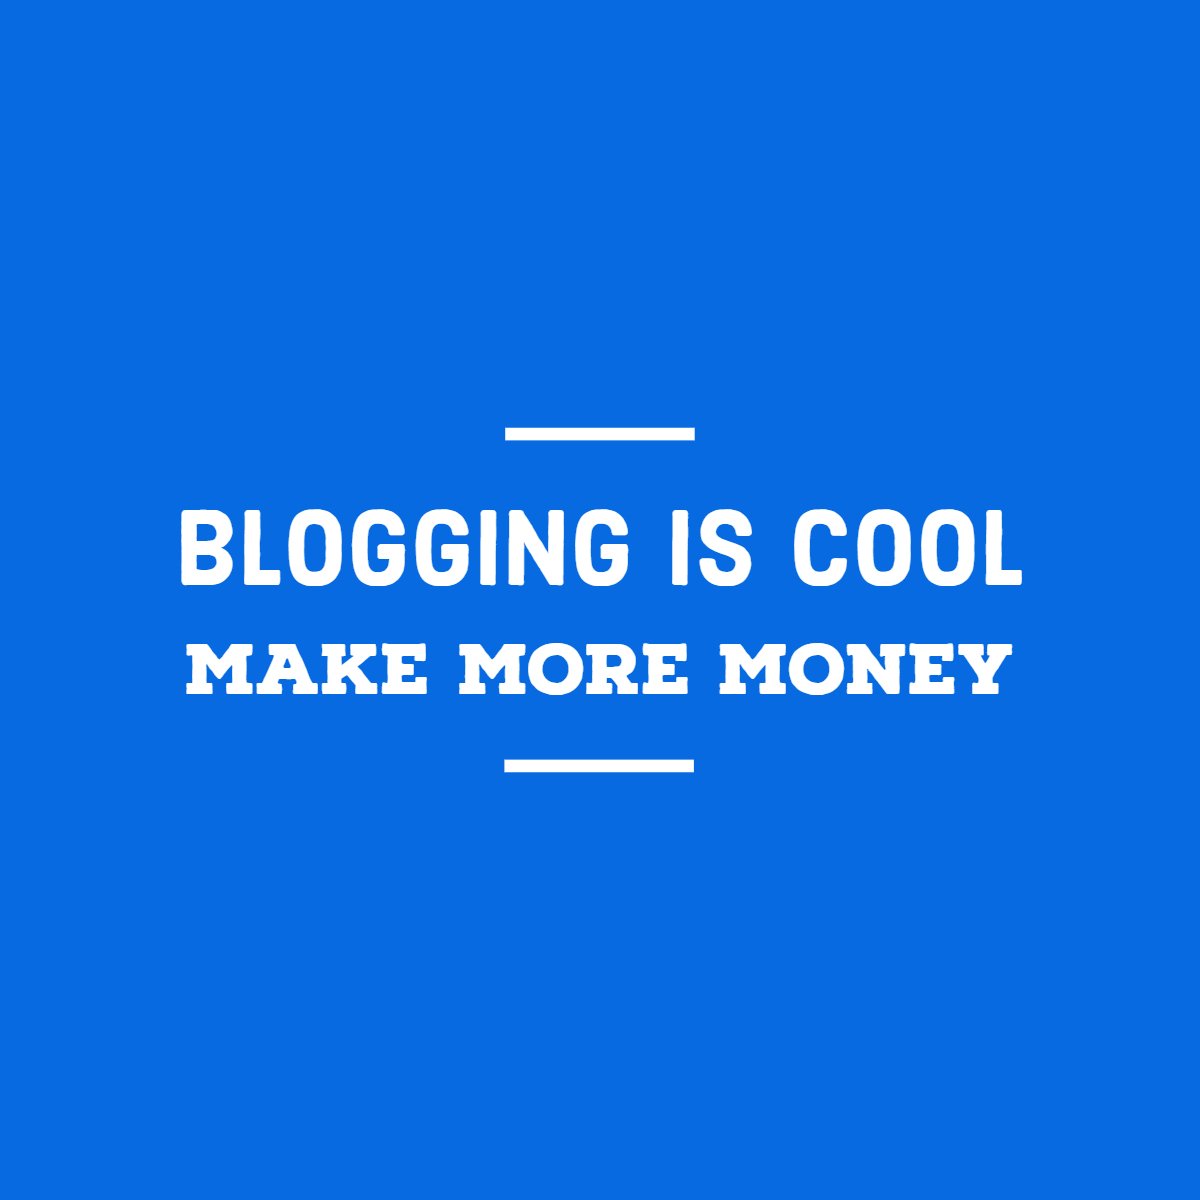 Bloggingiscool.com The Importance of Content Upgrades for Your Blog